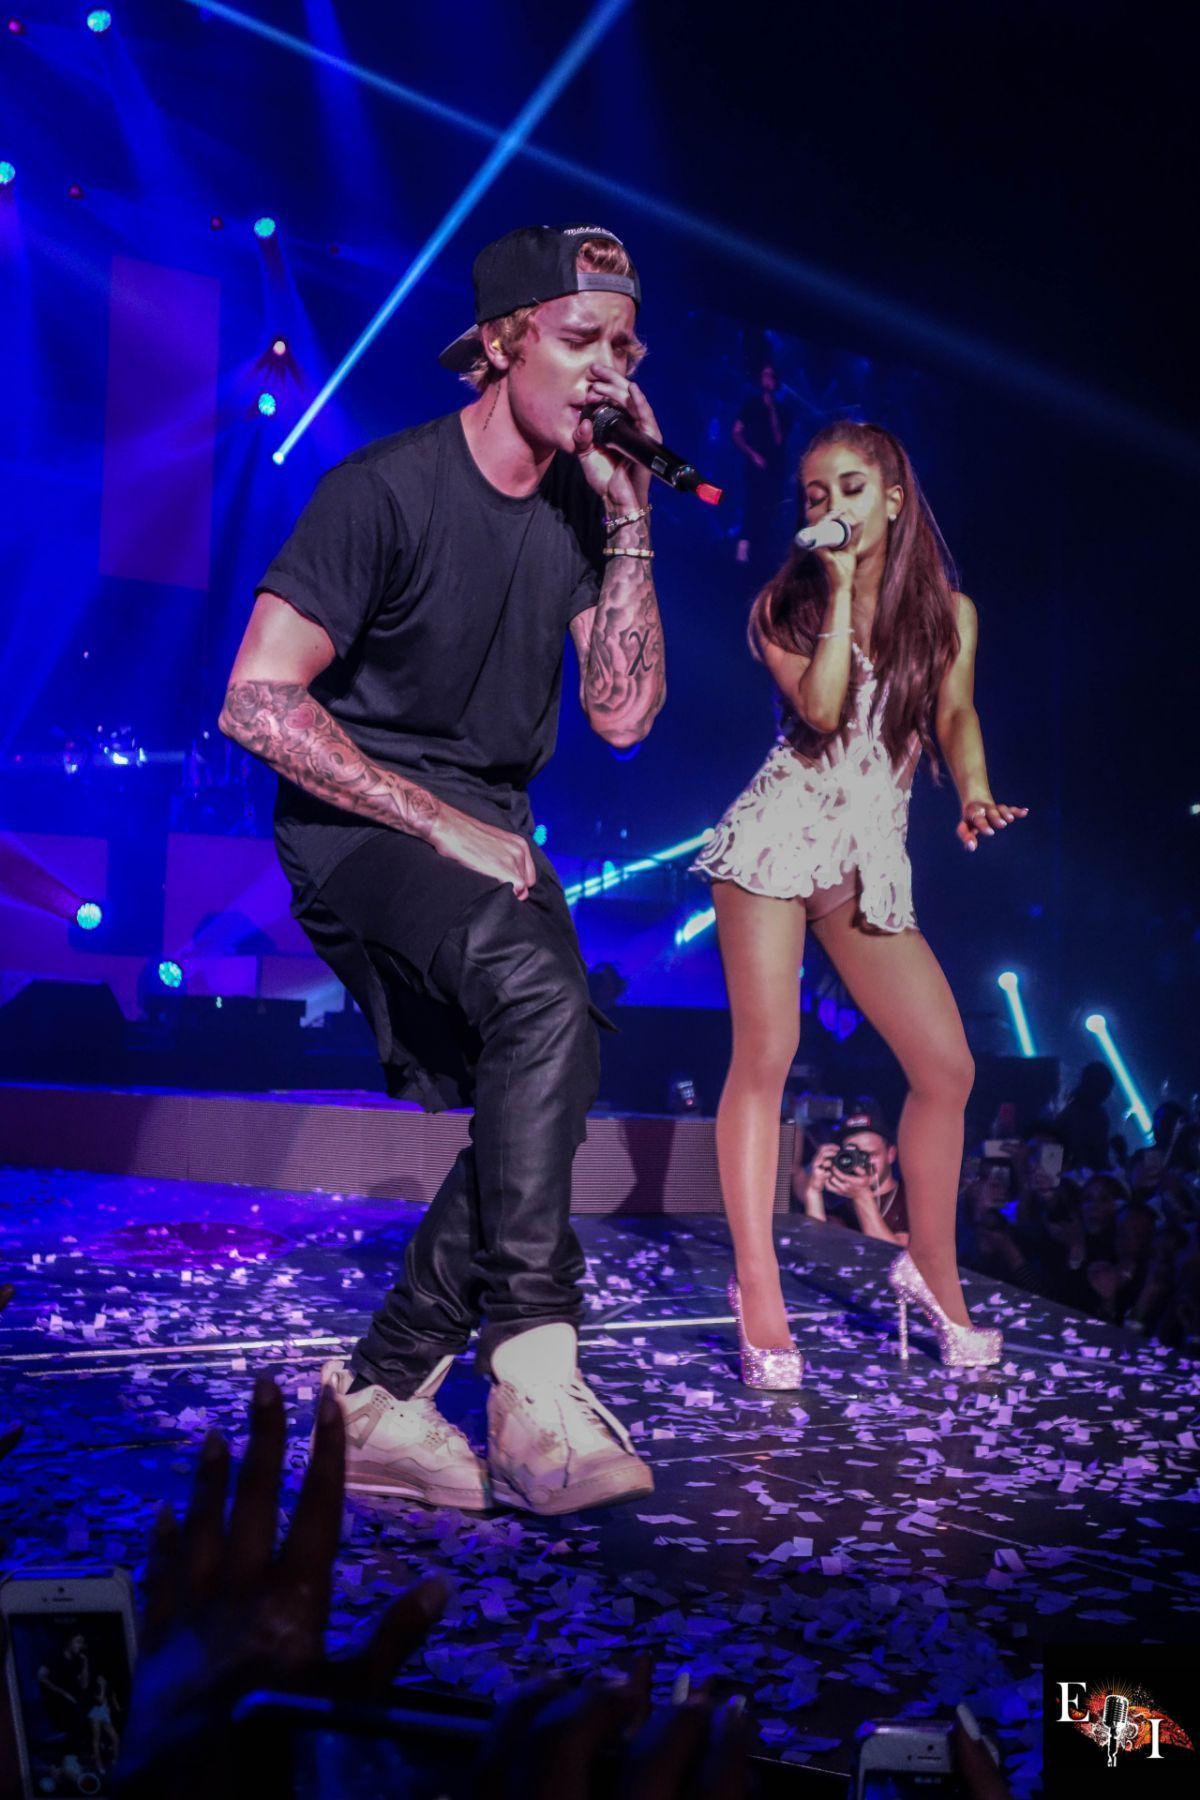 Ariana Grande And Justin Bieber Performs At Honeymoon Tour In